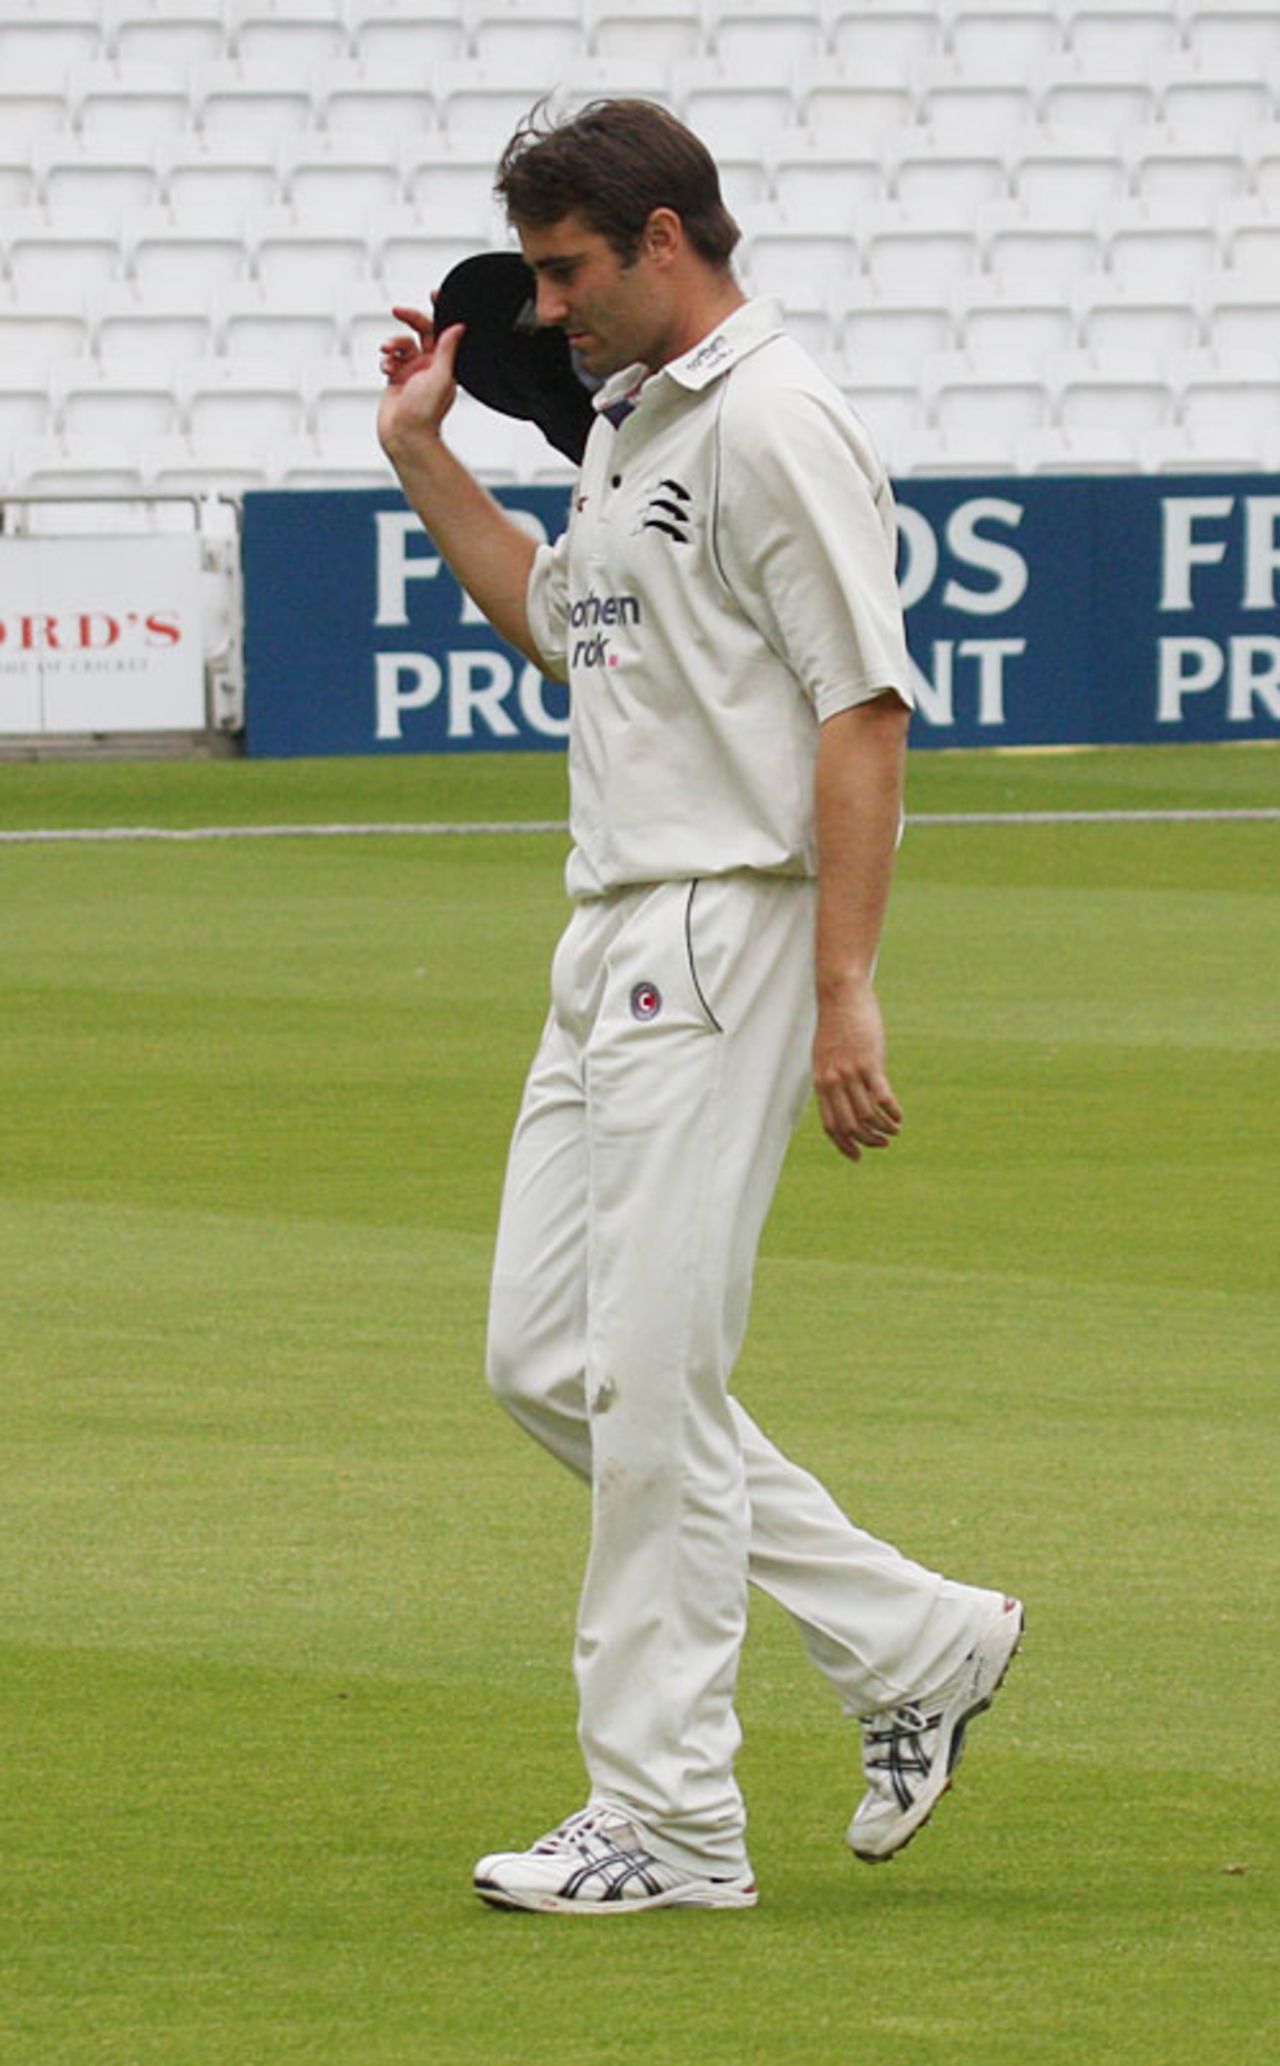 Tim Murtagh leads Middlesex off after taking 6 for 44, Middlesex v Essex, Lord's, June 6, 2008